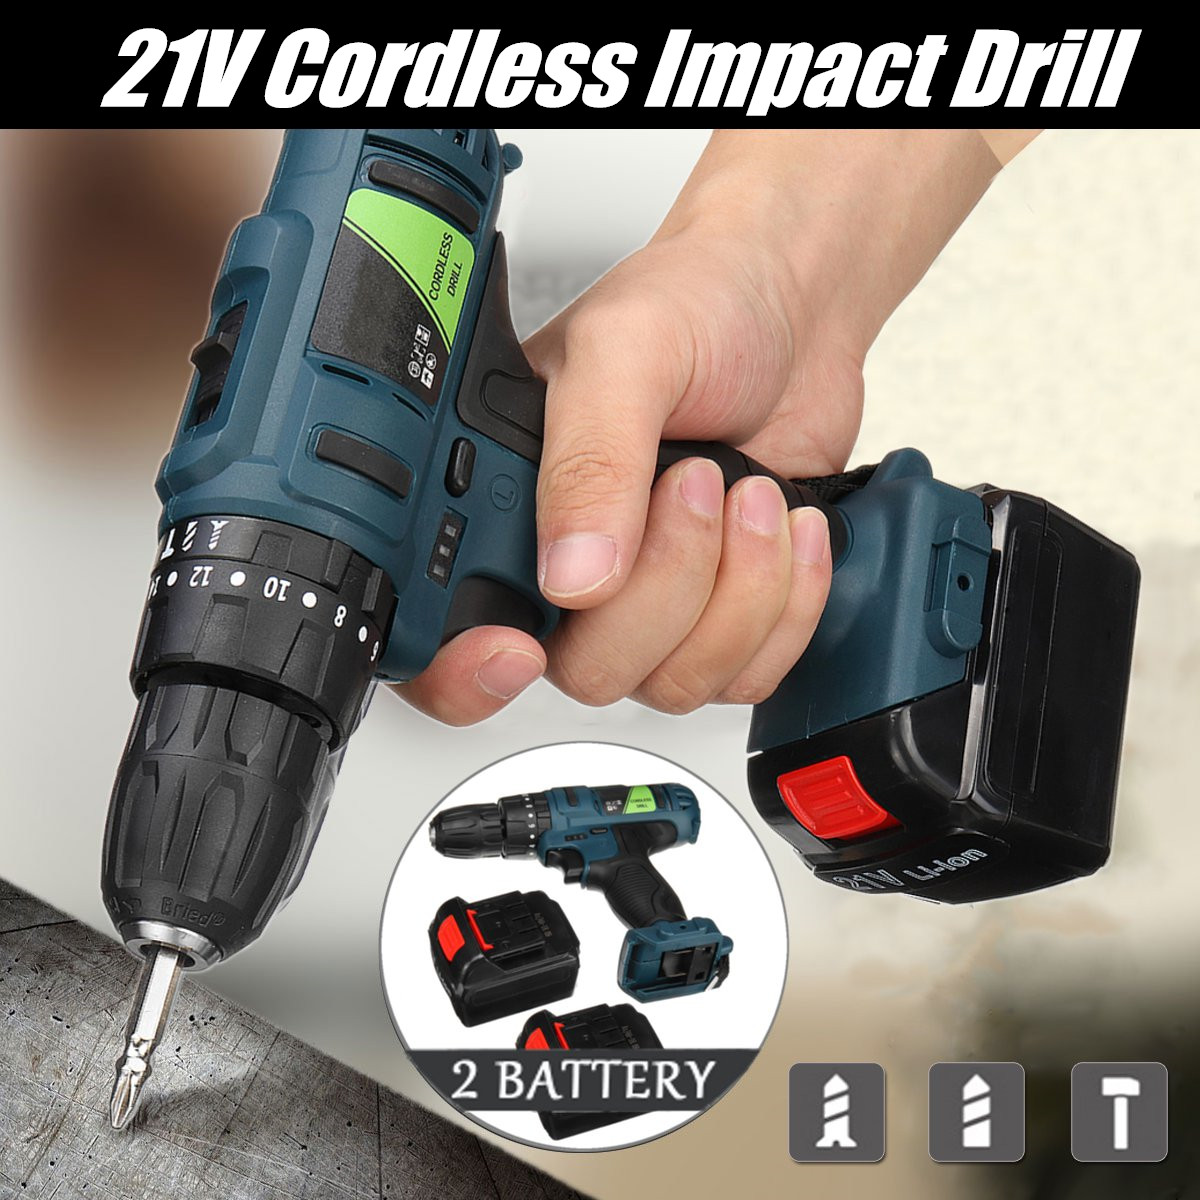 Adjustable-21V-Rechargeable-Cordless-Power-Impact-Drill-Electric-Screwdriver-with-2-Li-ion-Battery-1354629-1